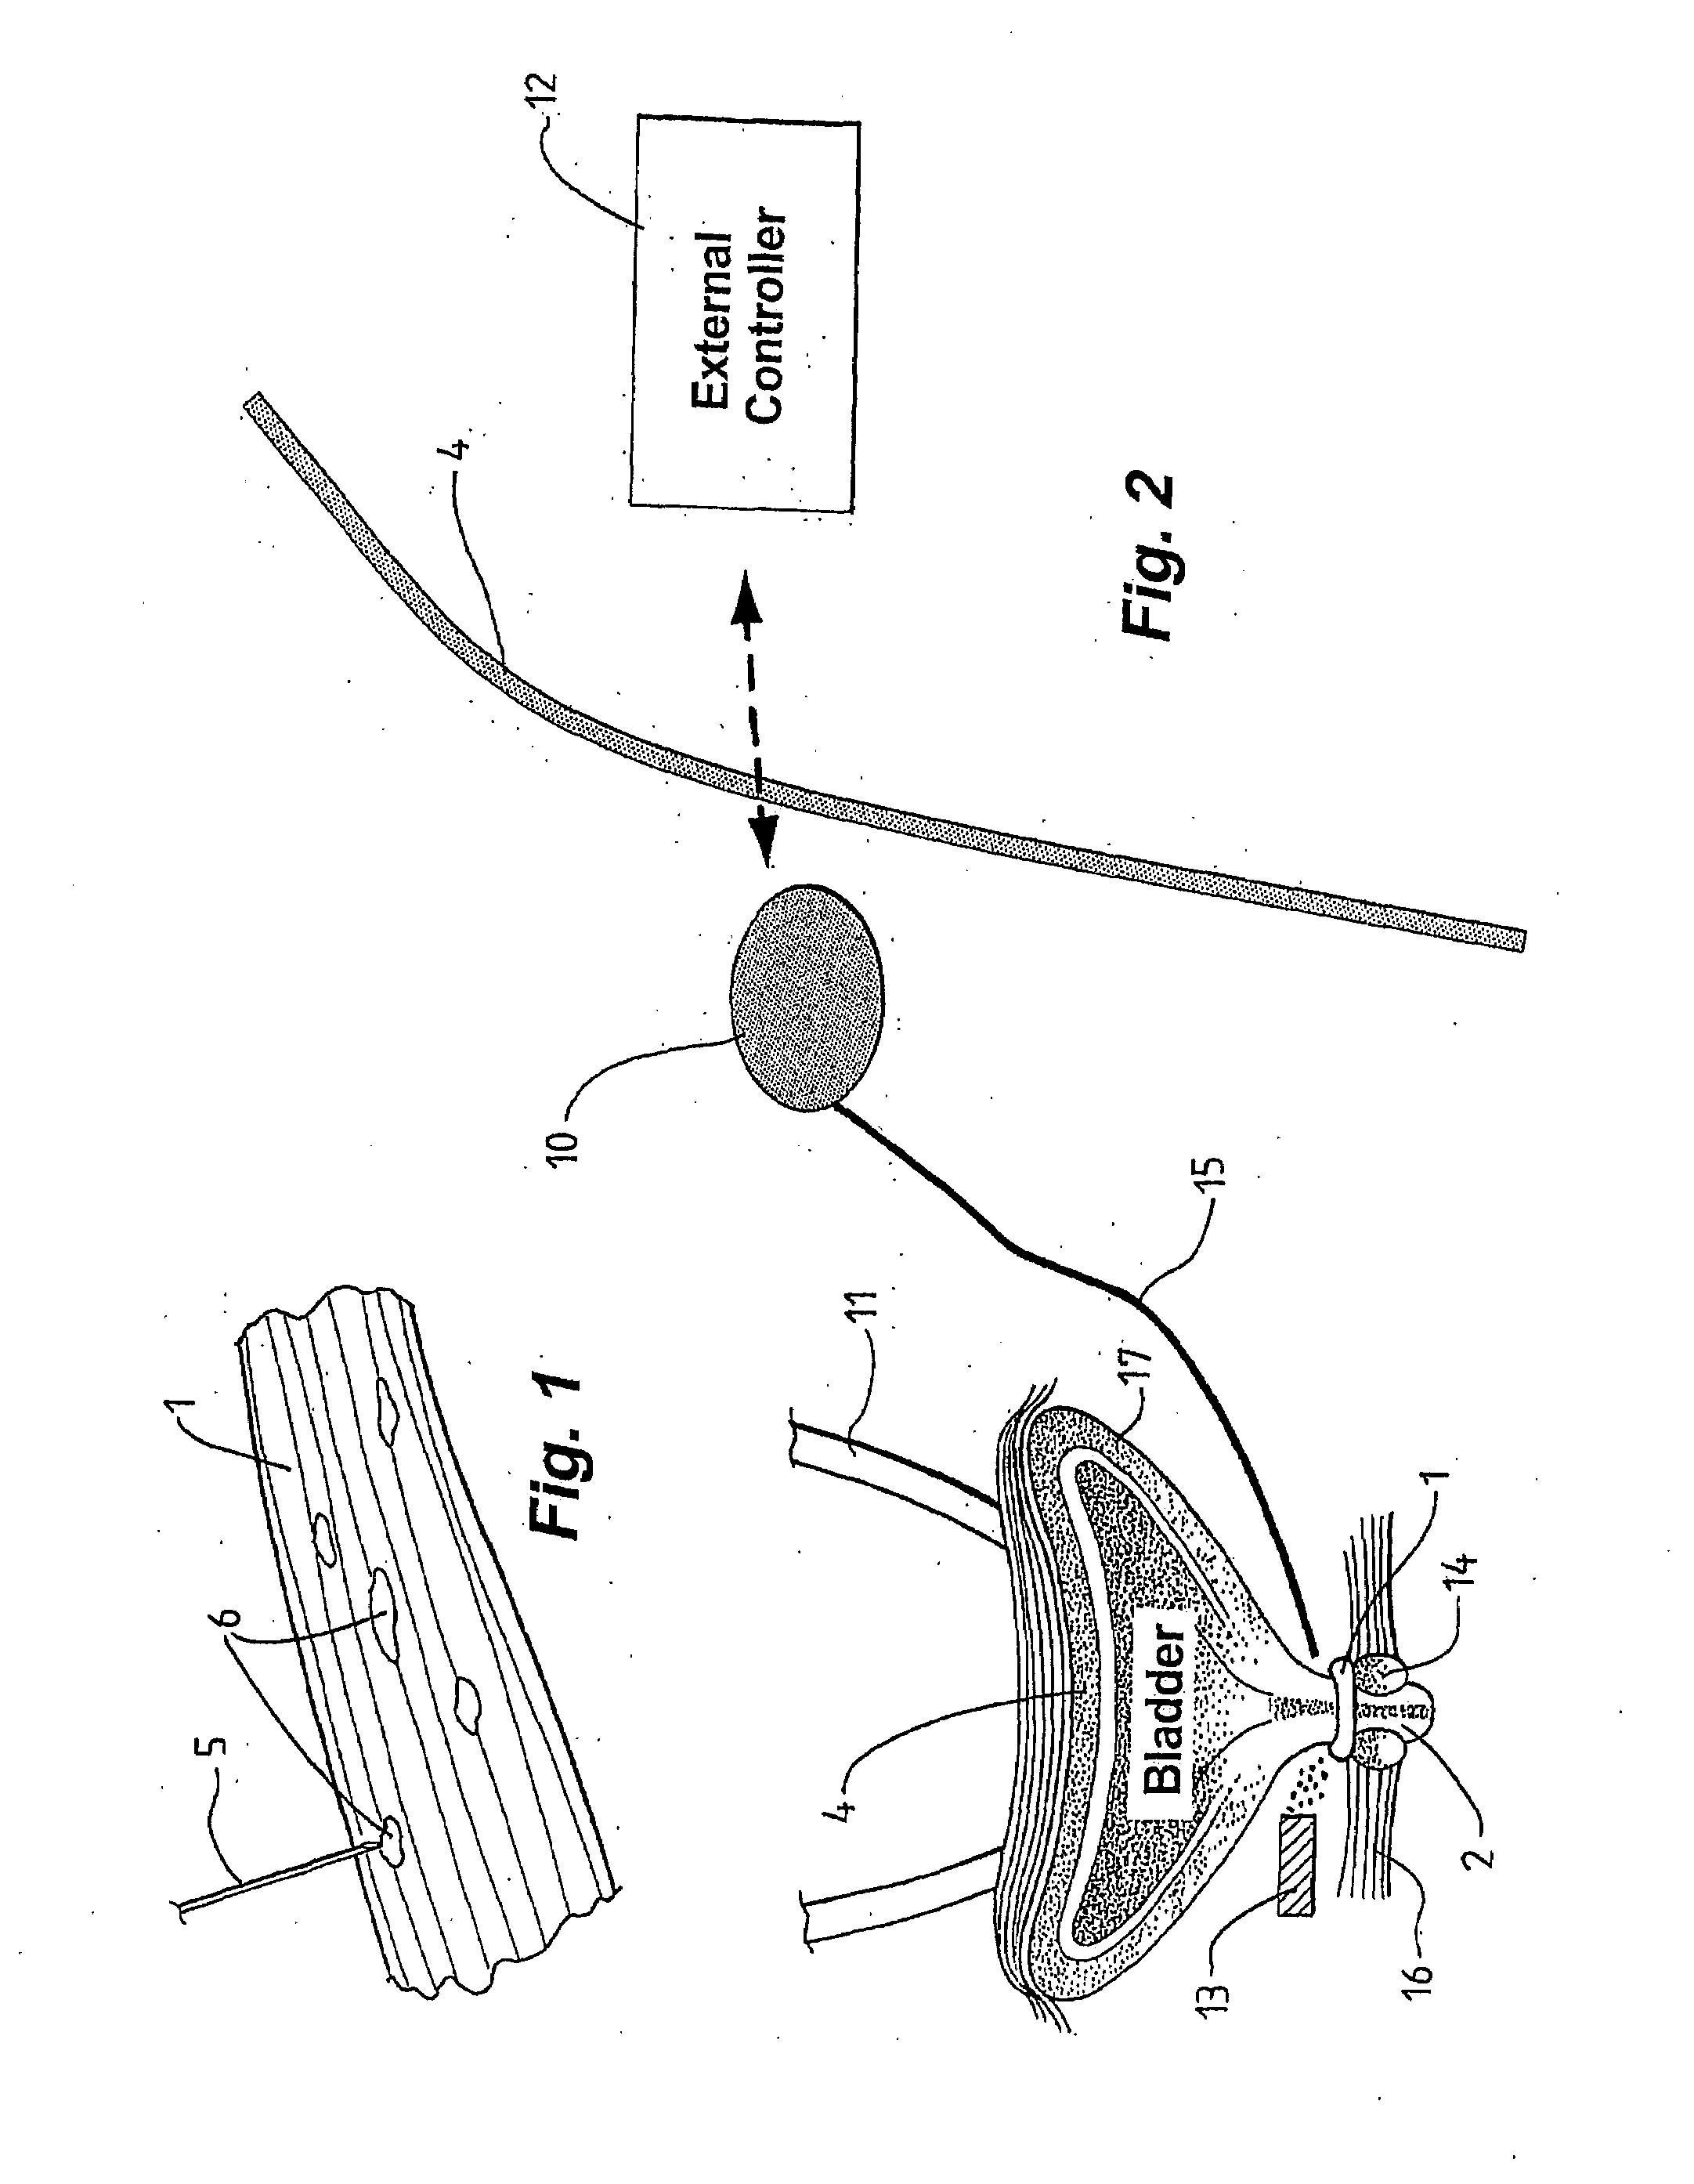 Smooth muscle implant for managing a medical condition